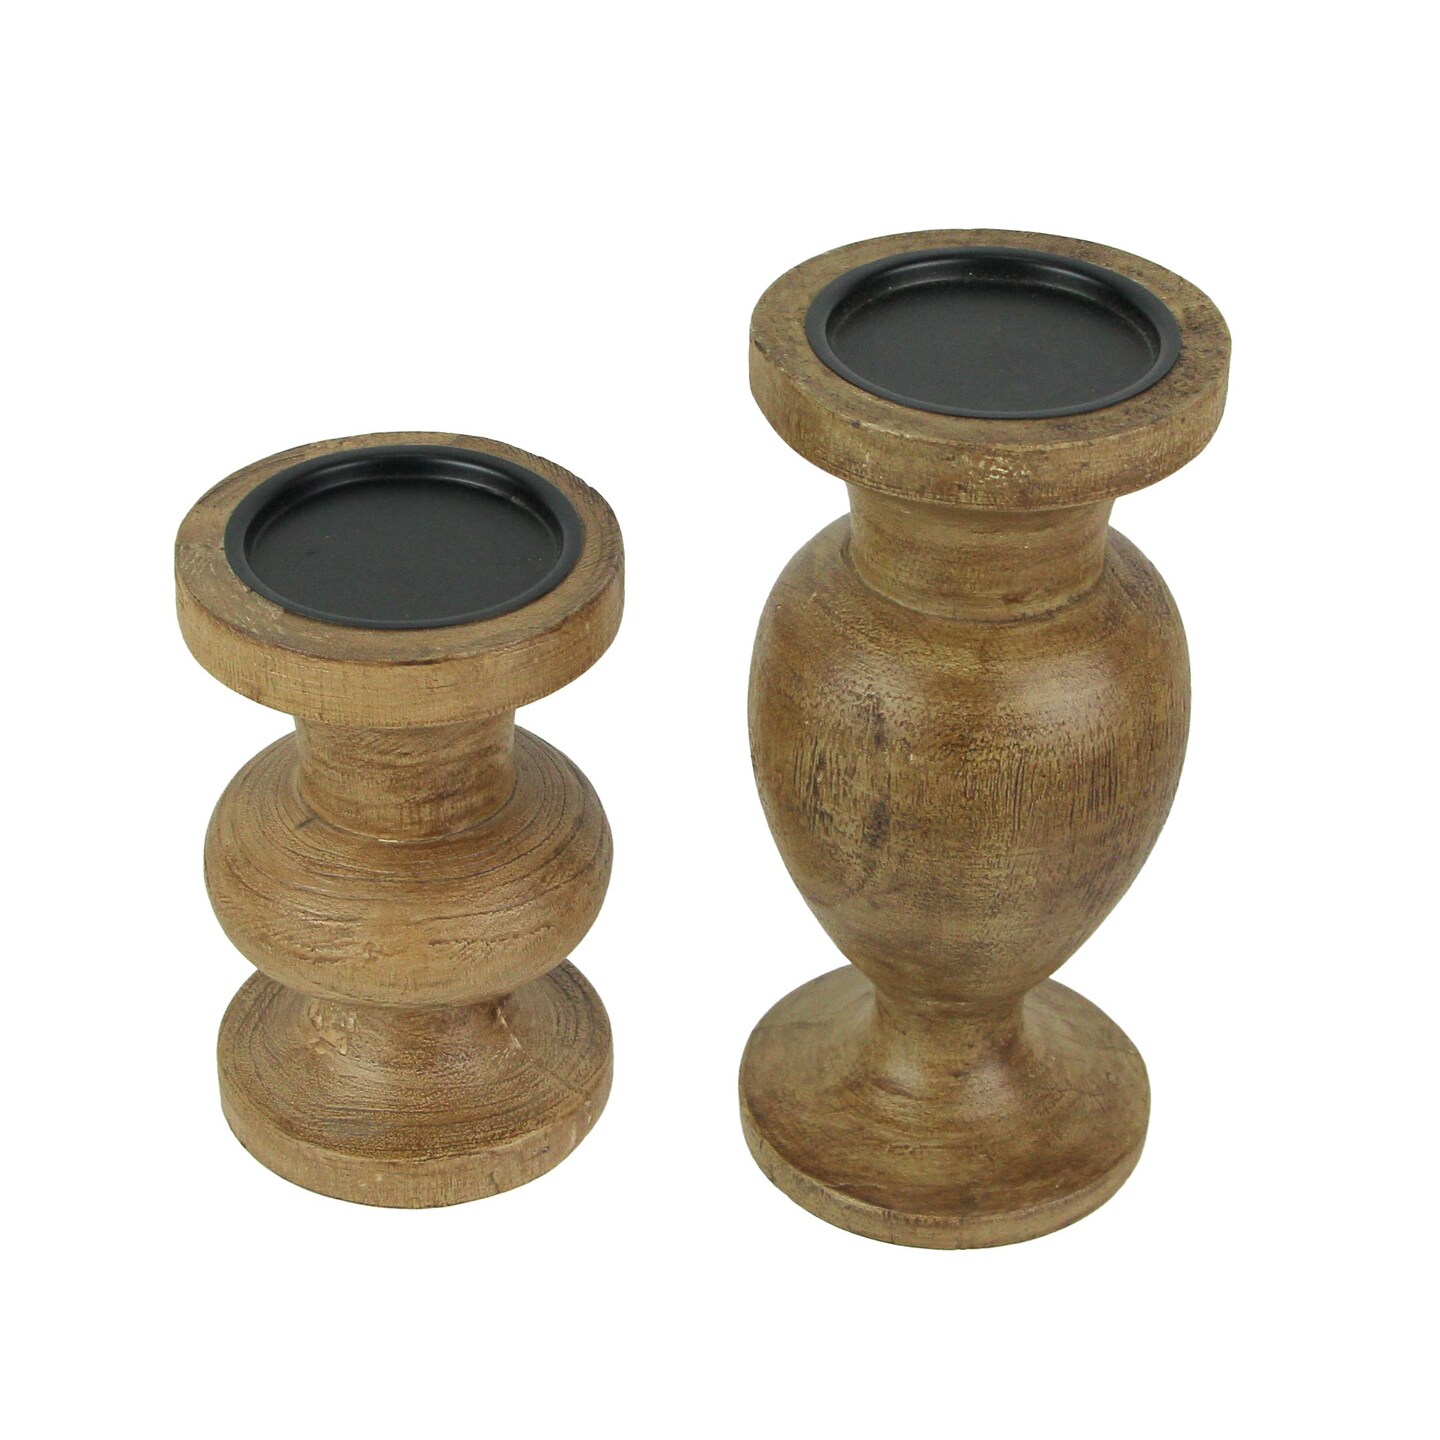 Set of 2 Turned Wood and Metal Pedestal Pillar or Votive Candle Holders